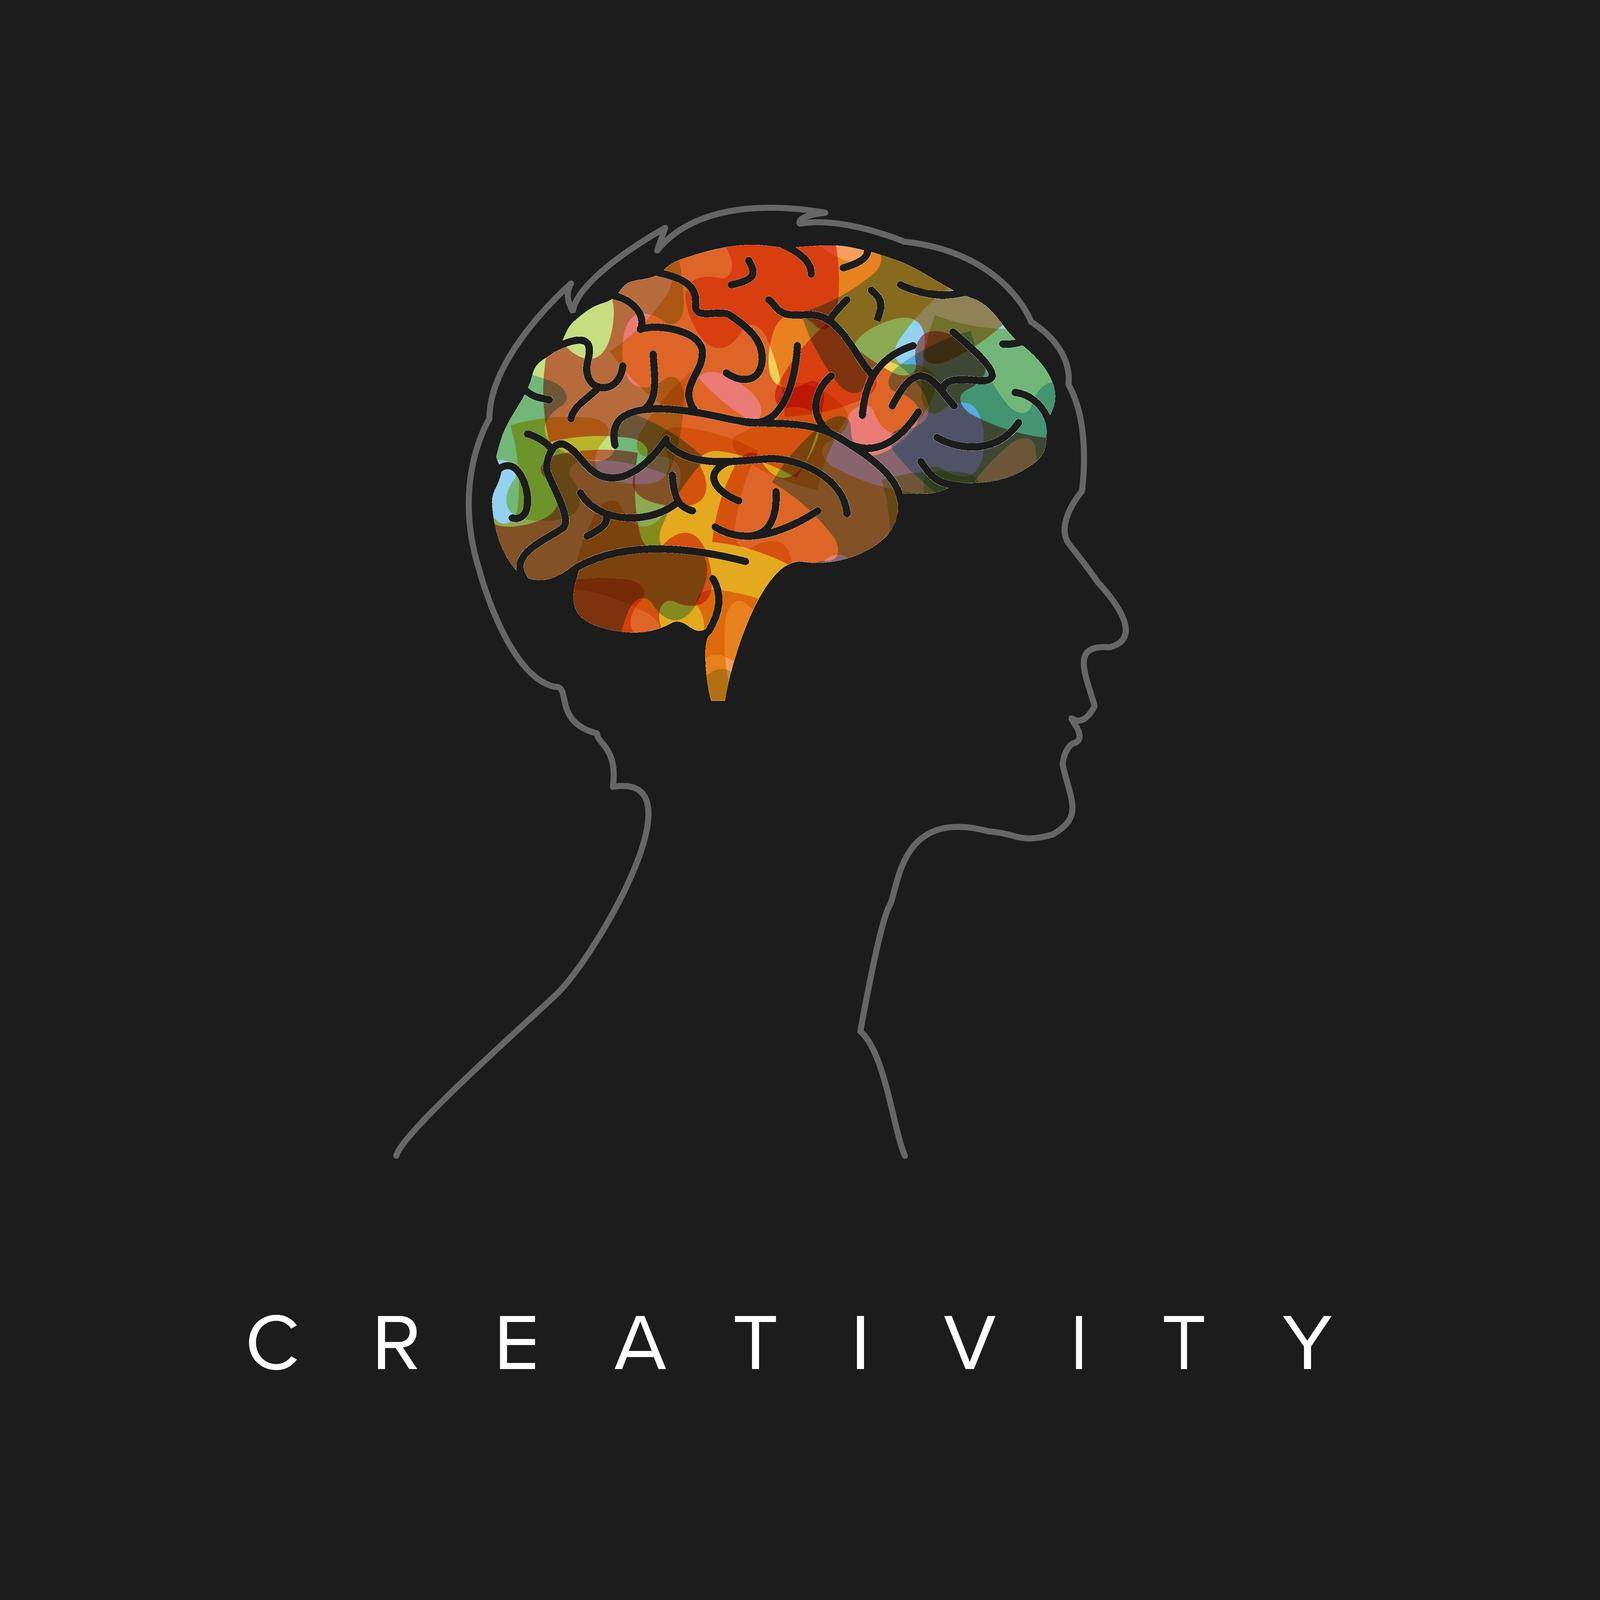 Creative mind concept illustration by orson